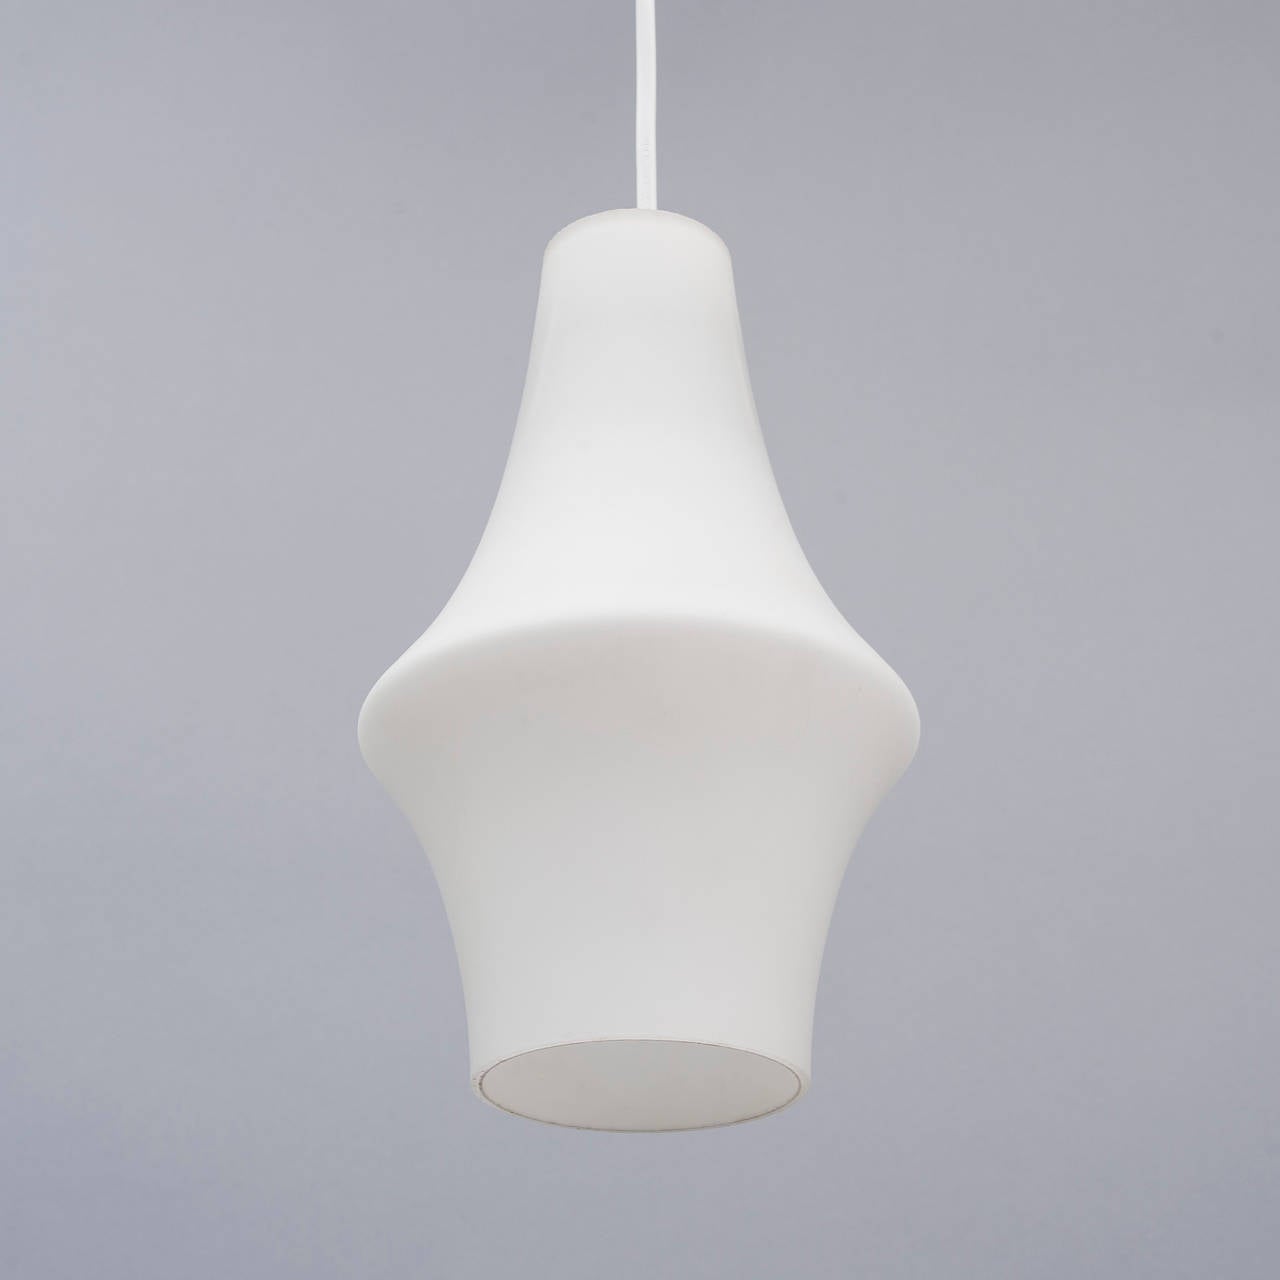 A pendant designed by Lisa Johansson-Pape for Orno. Finland. Model 66-077, circa 1960s.
Frosted glass pendant height is 10